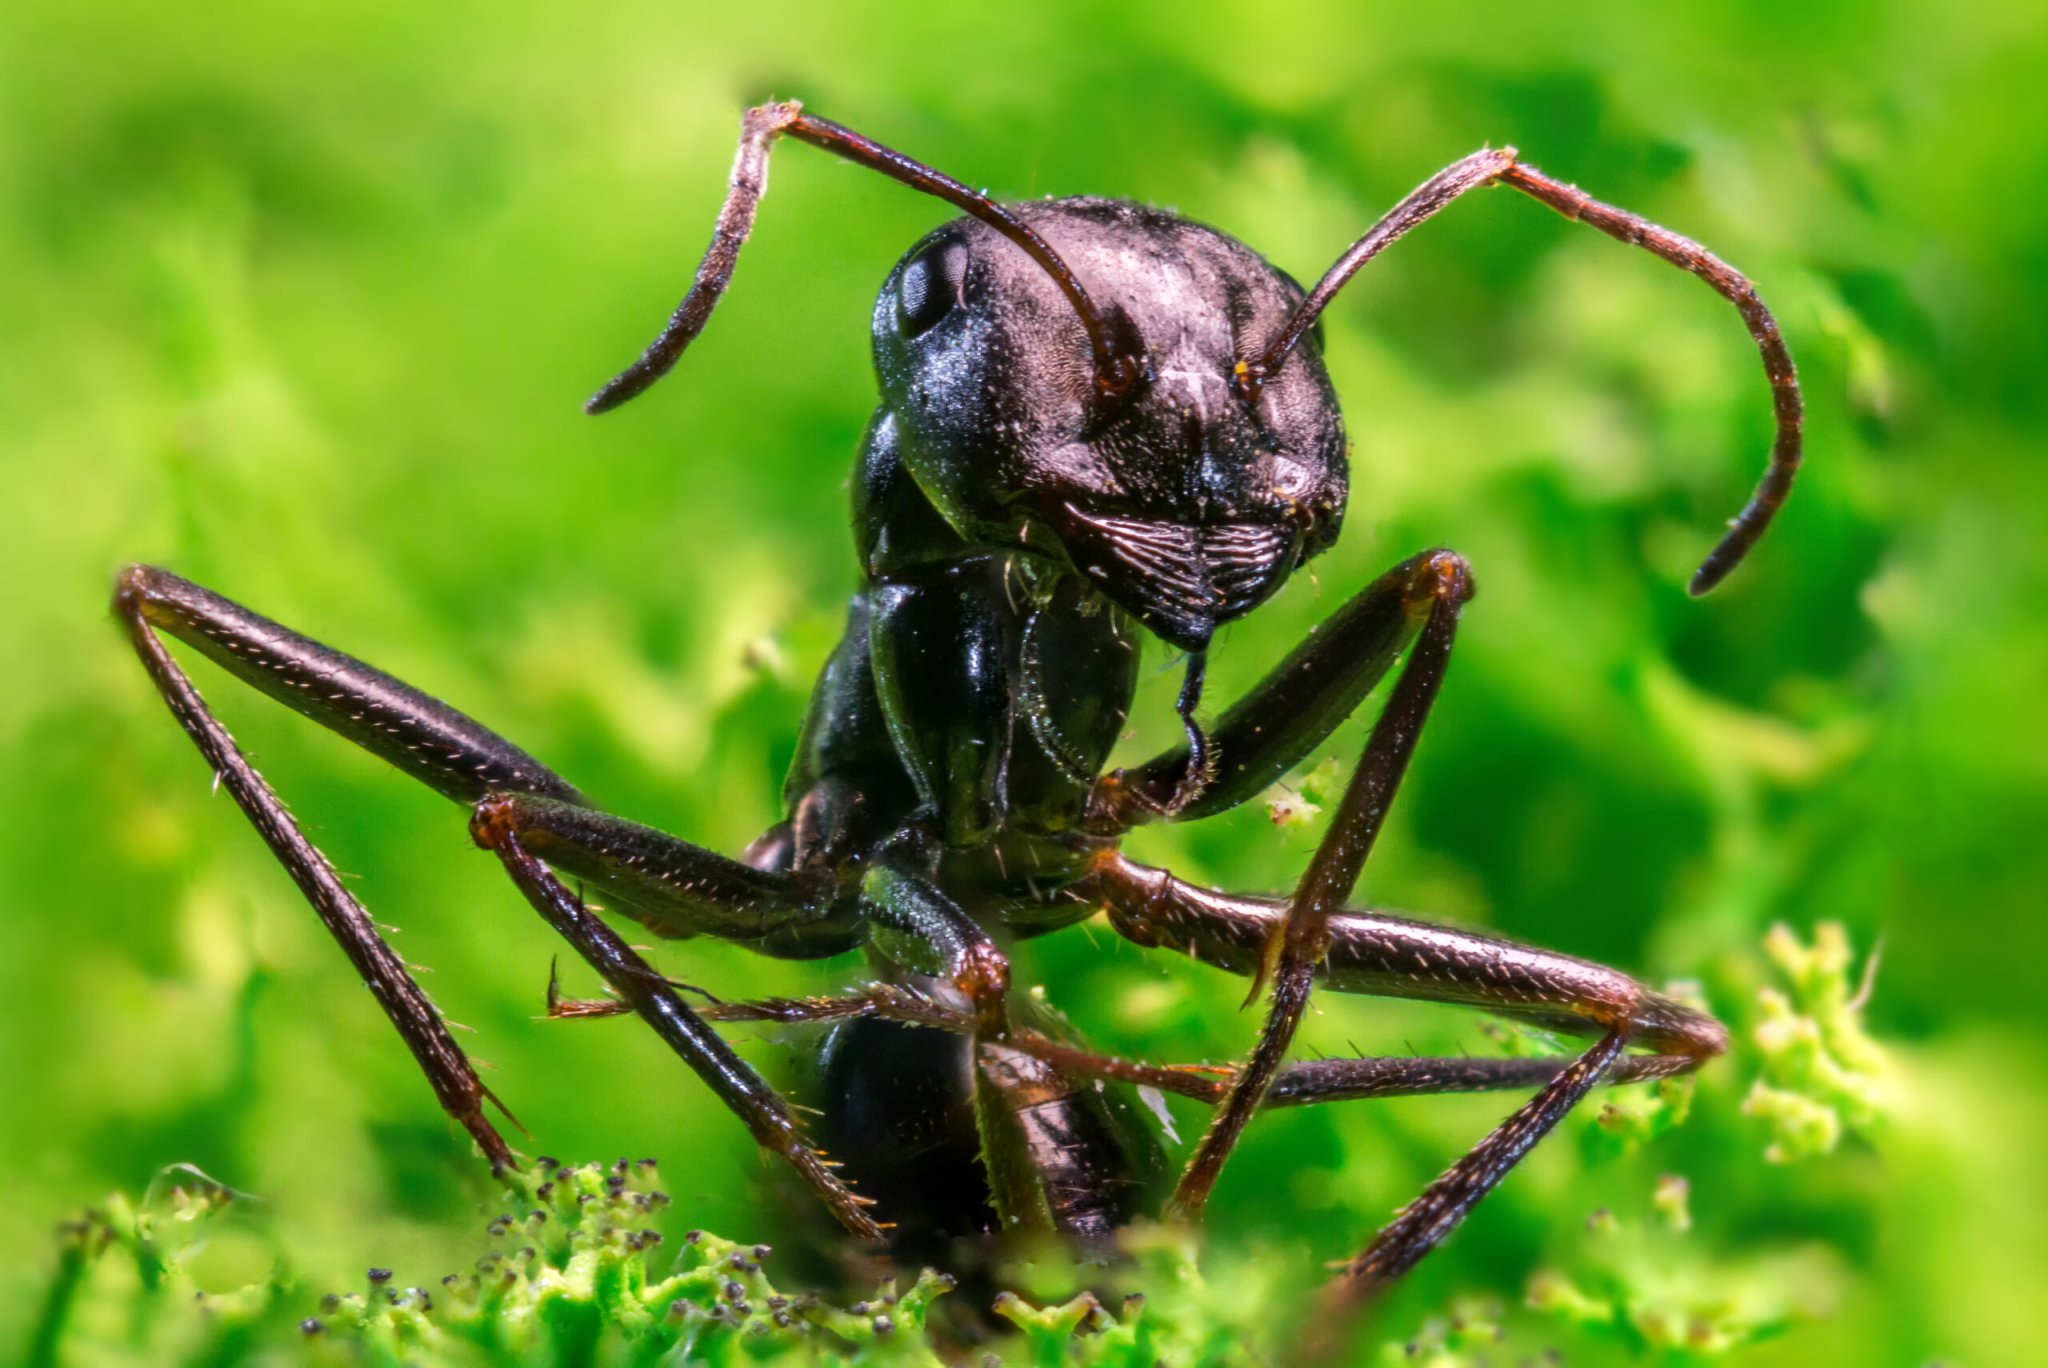 Ants can effectively adapt to urban environments